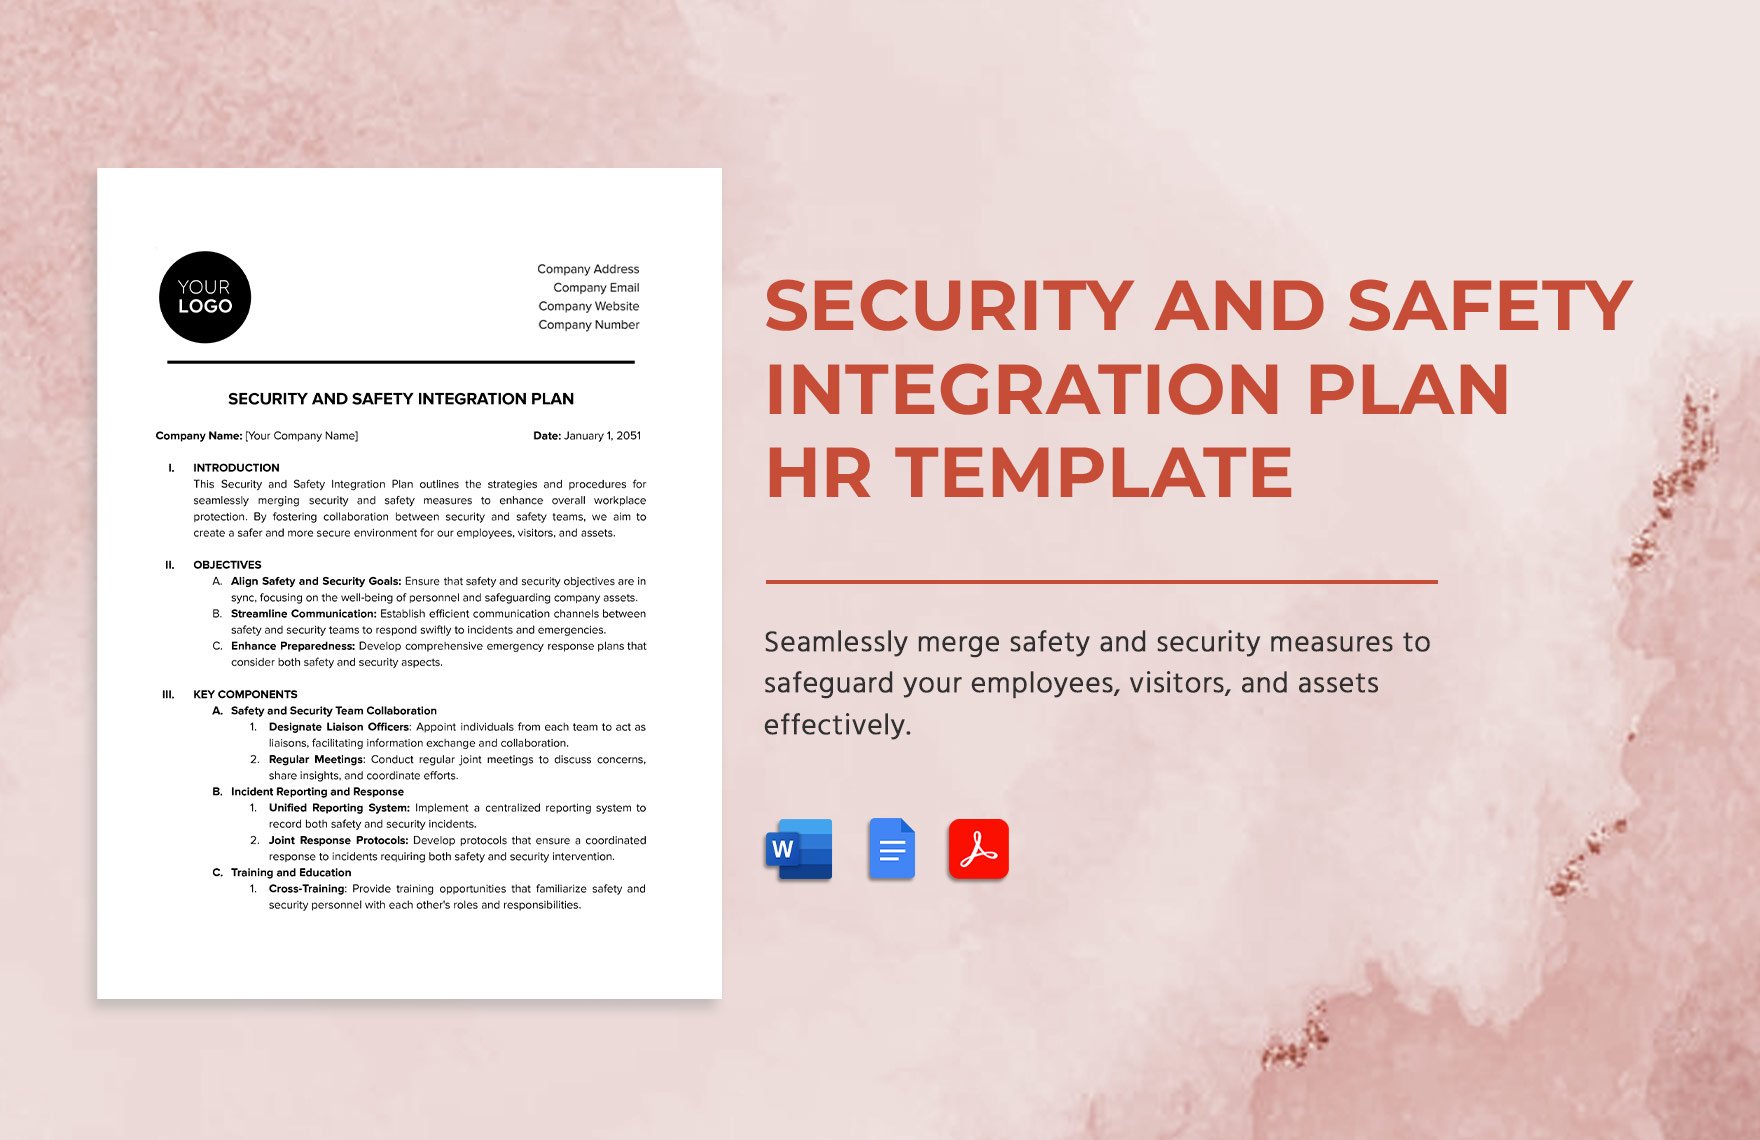 Security and Safety Integration Plan HR Template